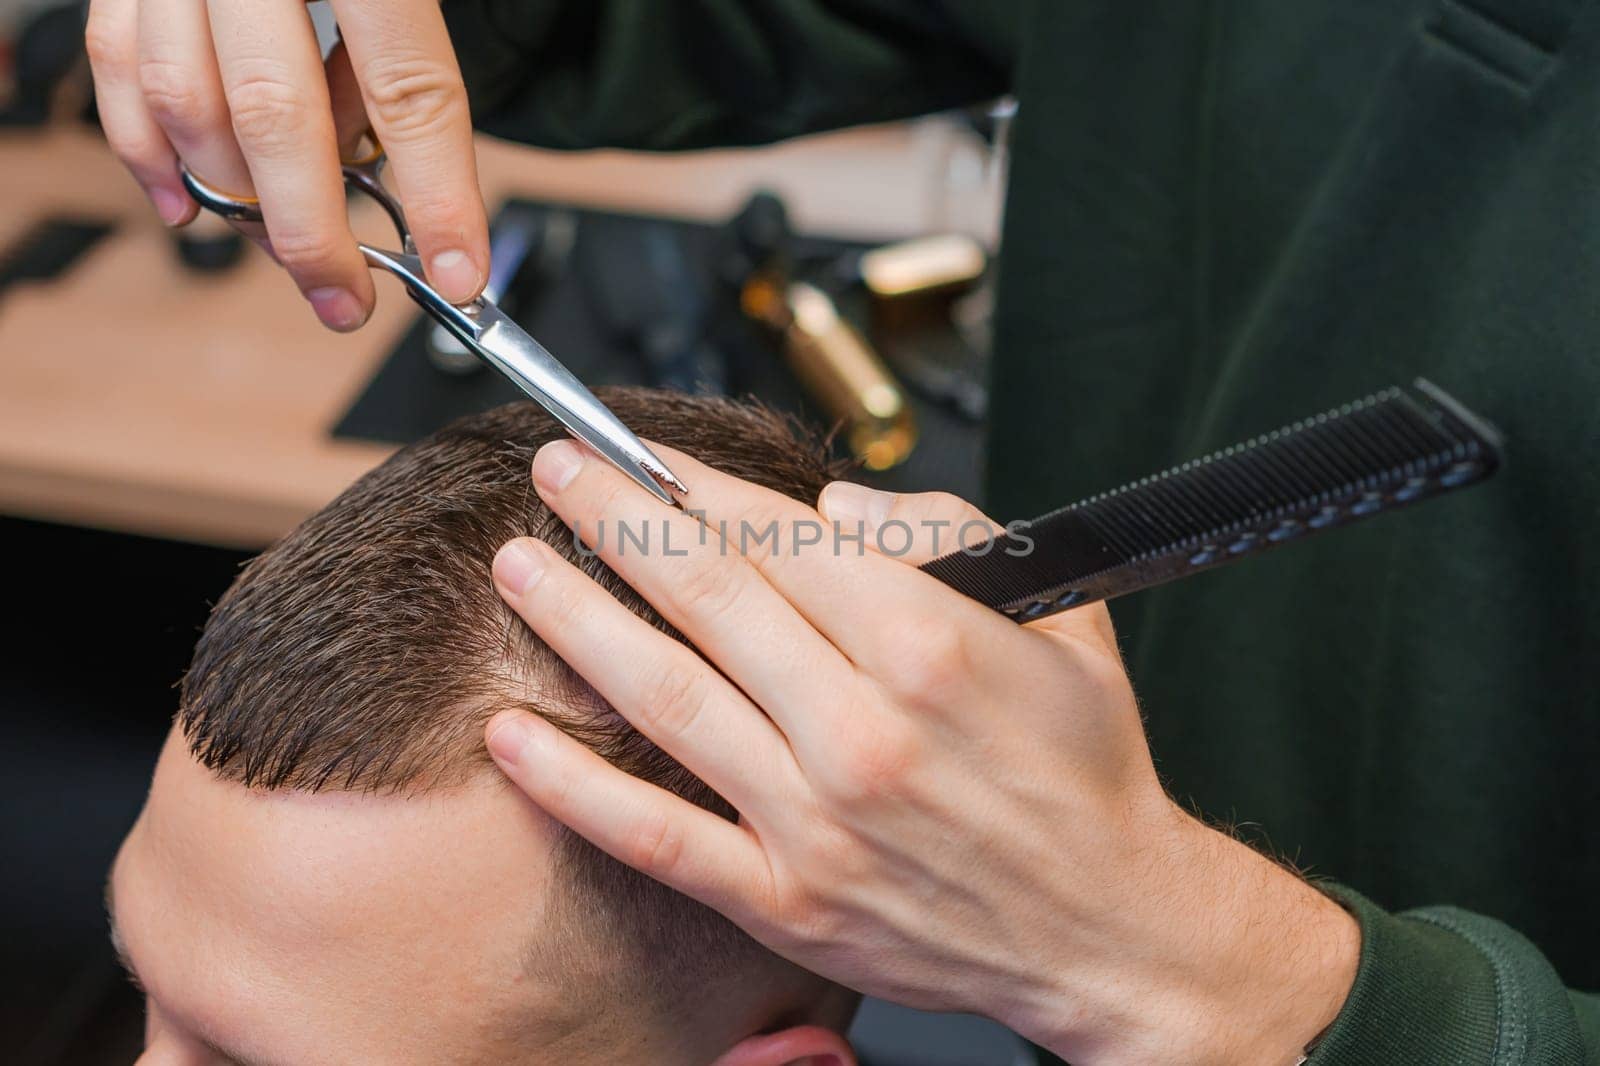 Hairstylist expertly trims the clients brunette hair using scissors at the barbershop